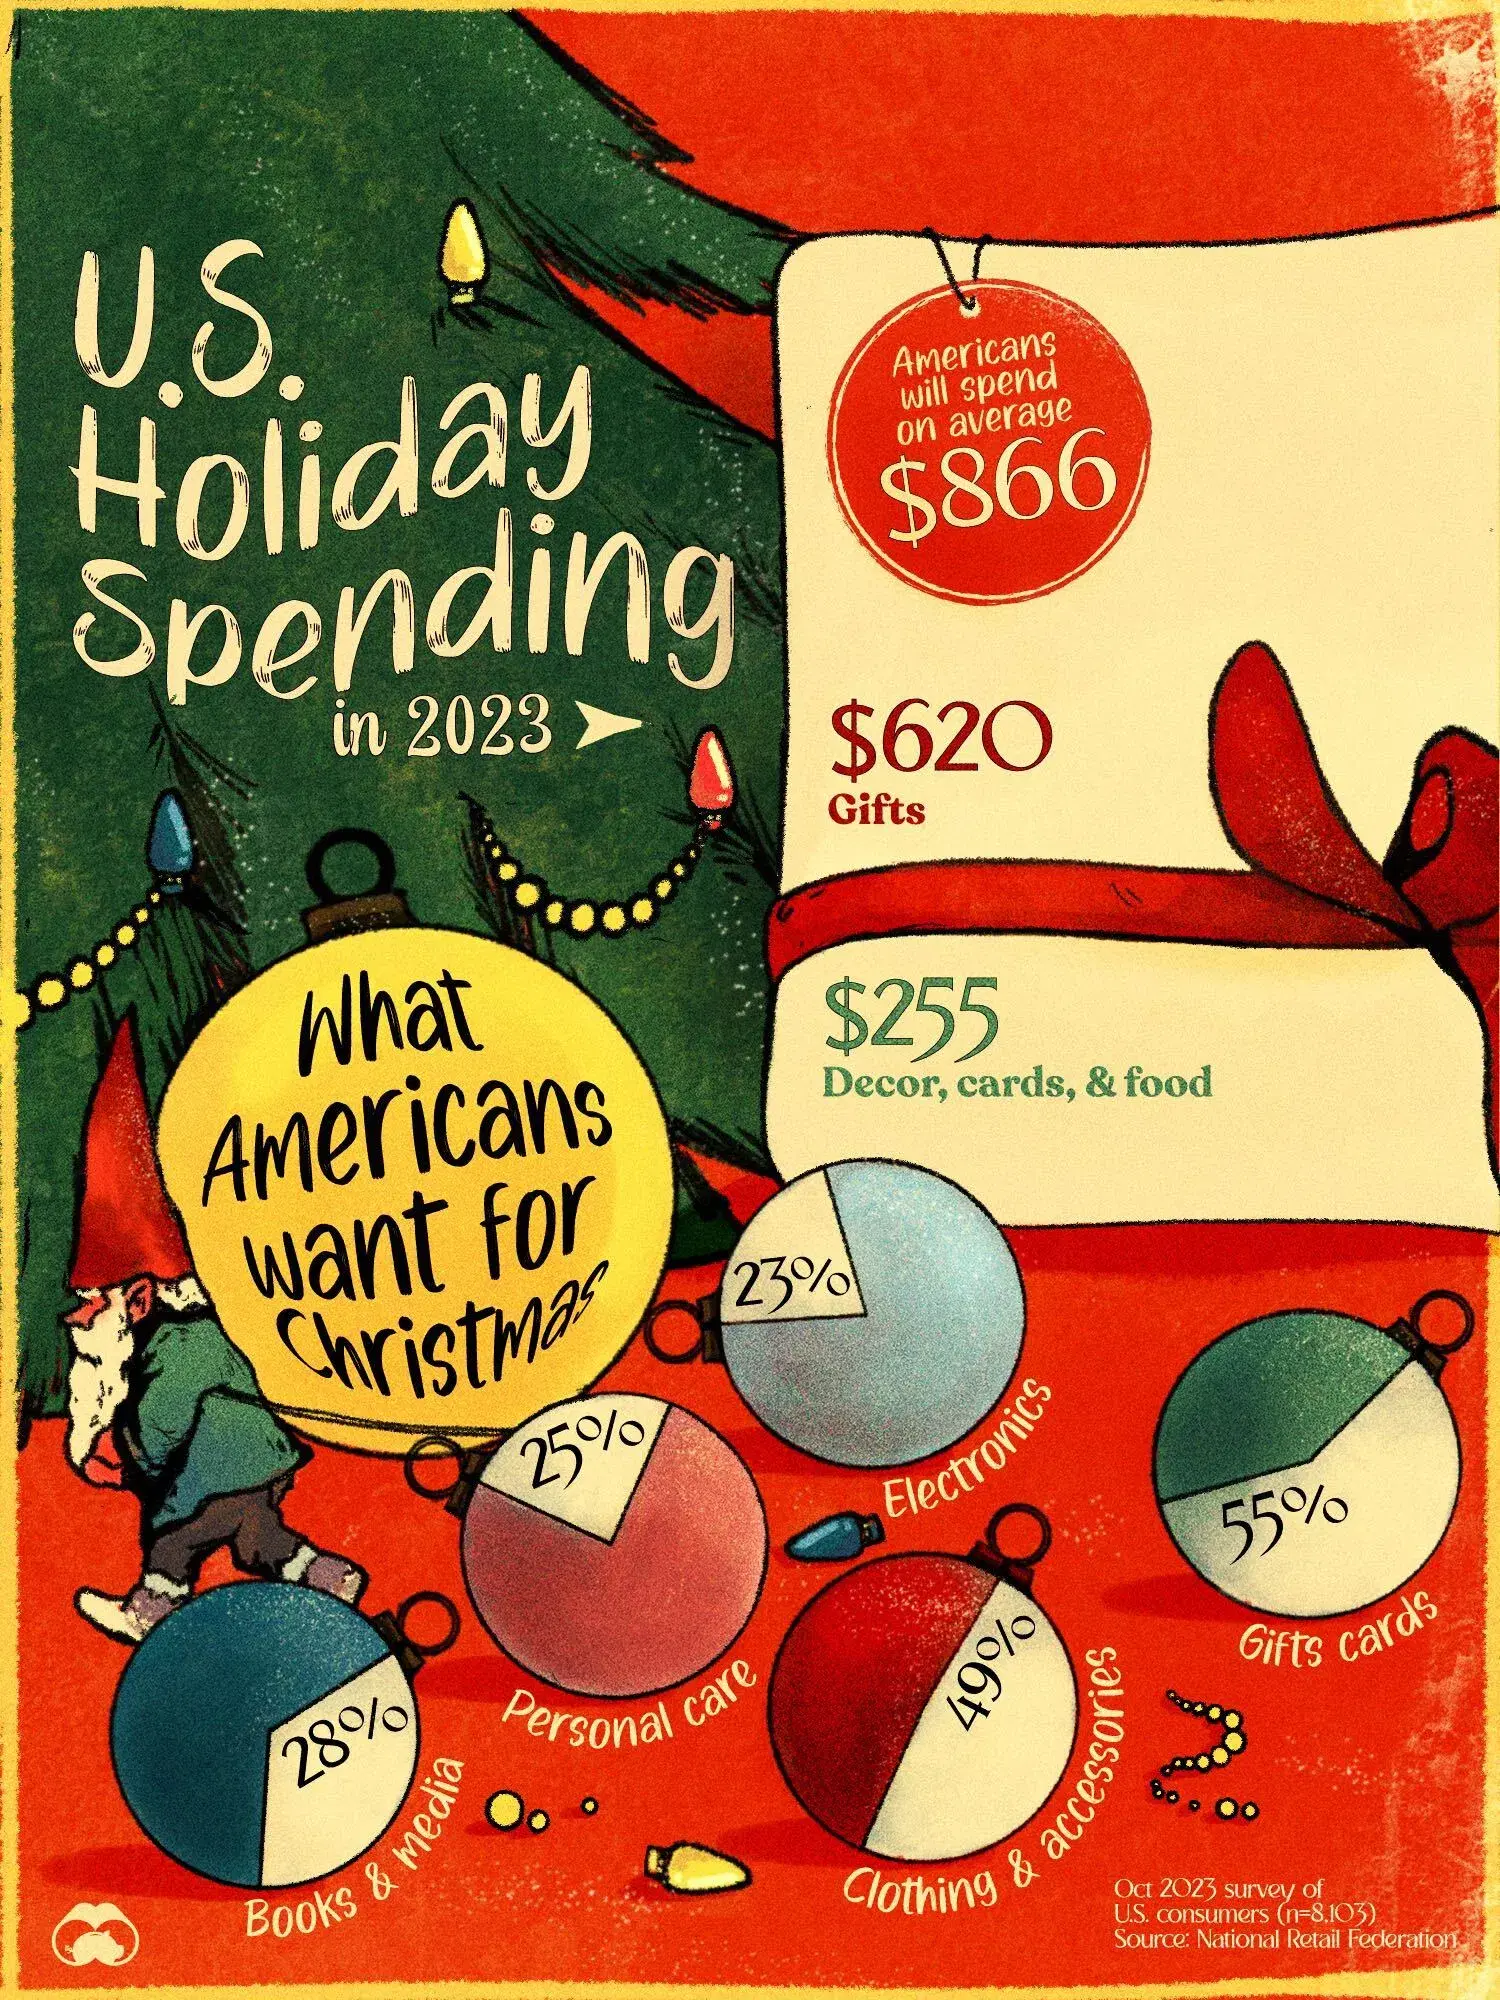 Americans Could Spend $967 Billion This Holiday Season 🎄